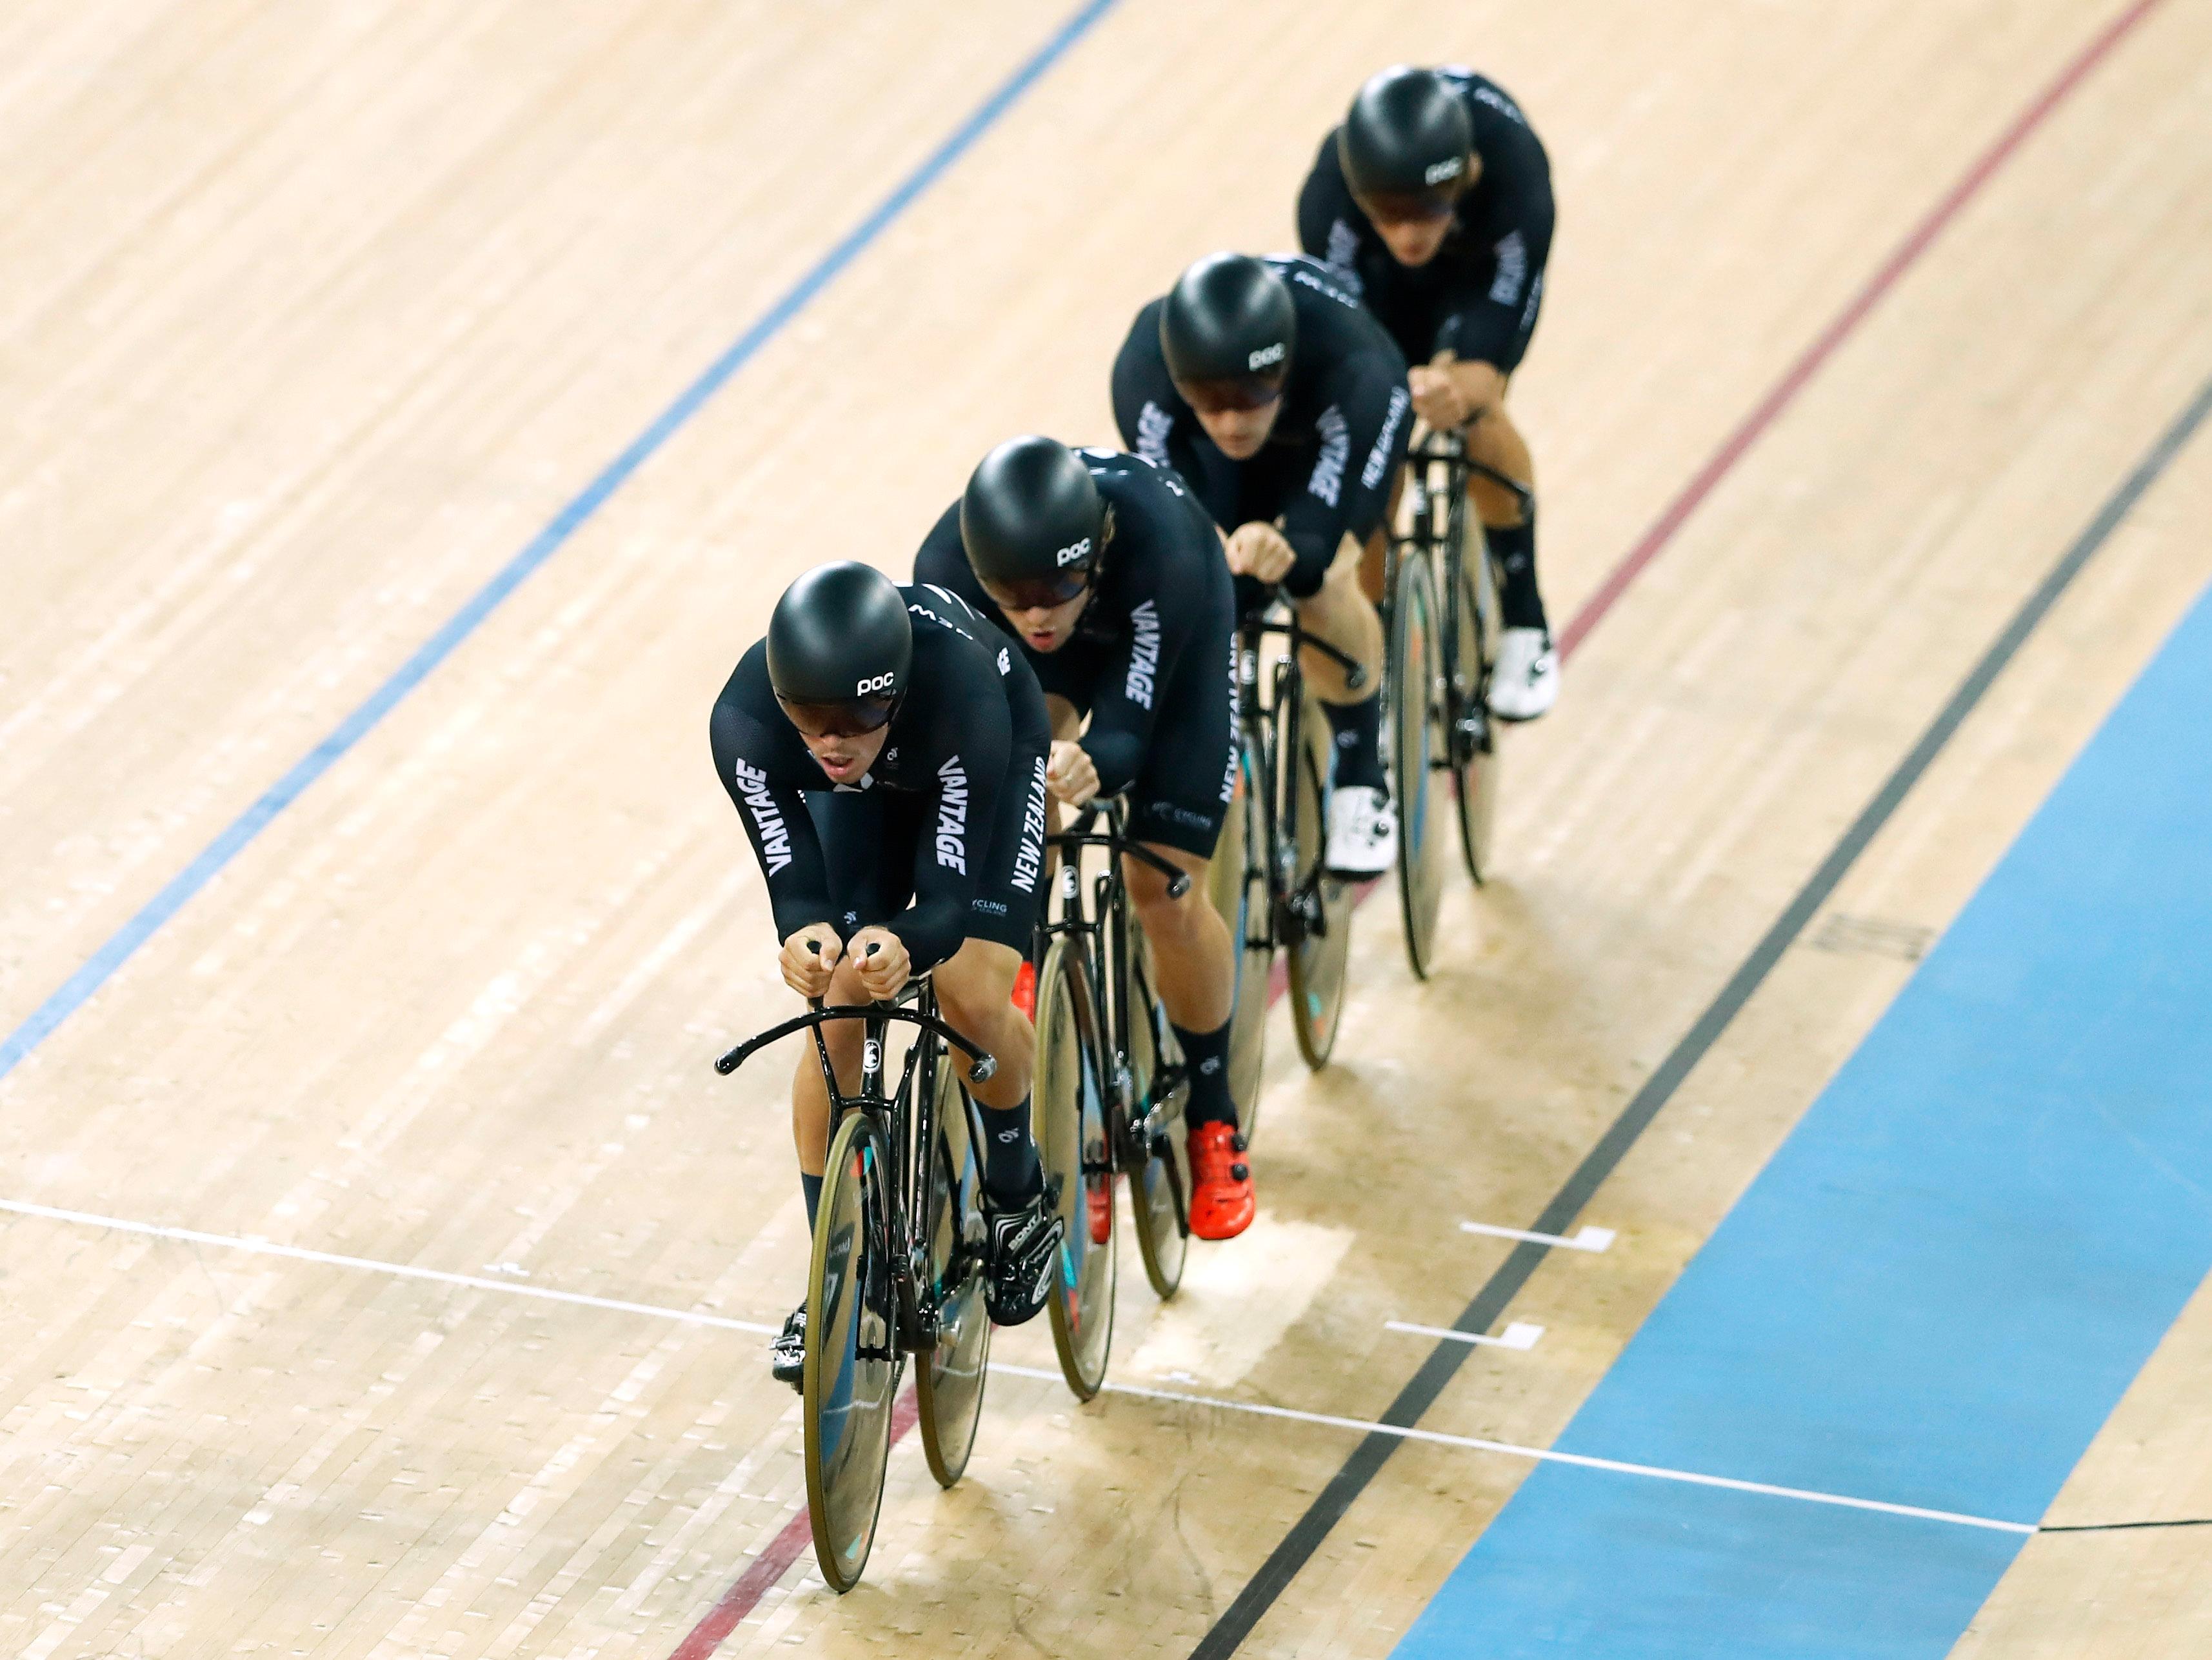 Video Two more medals for New Zealand at World Track Cycling